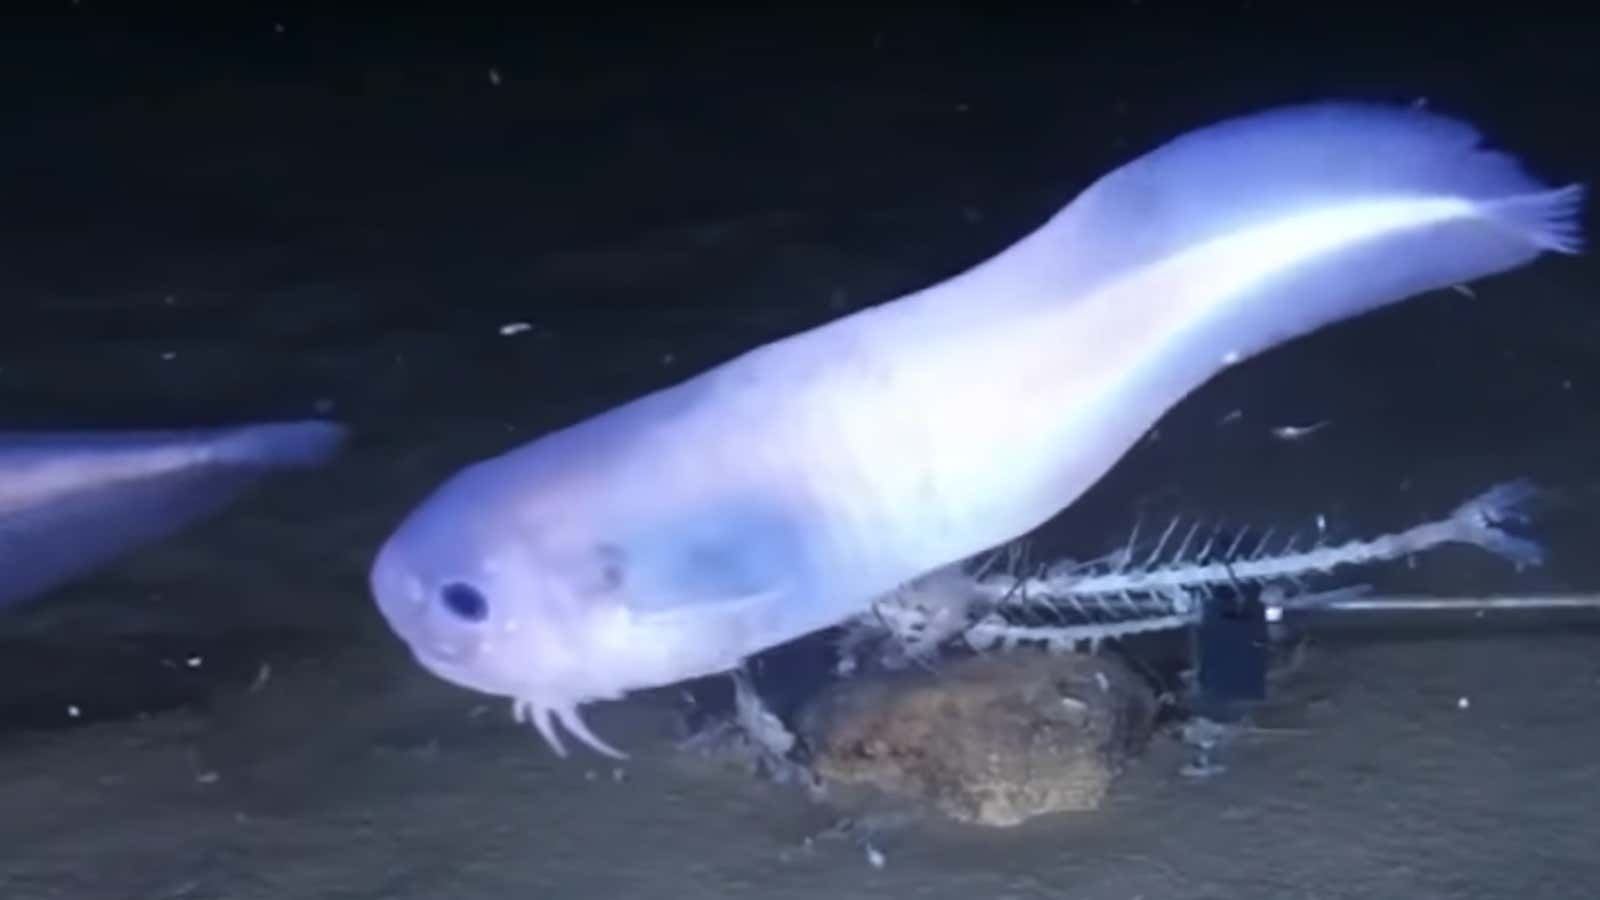 A new fish found 26,000 feet deep melts at the surface of the sea